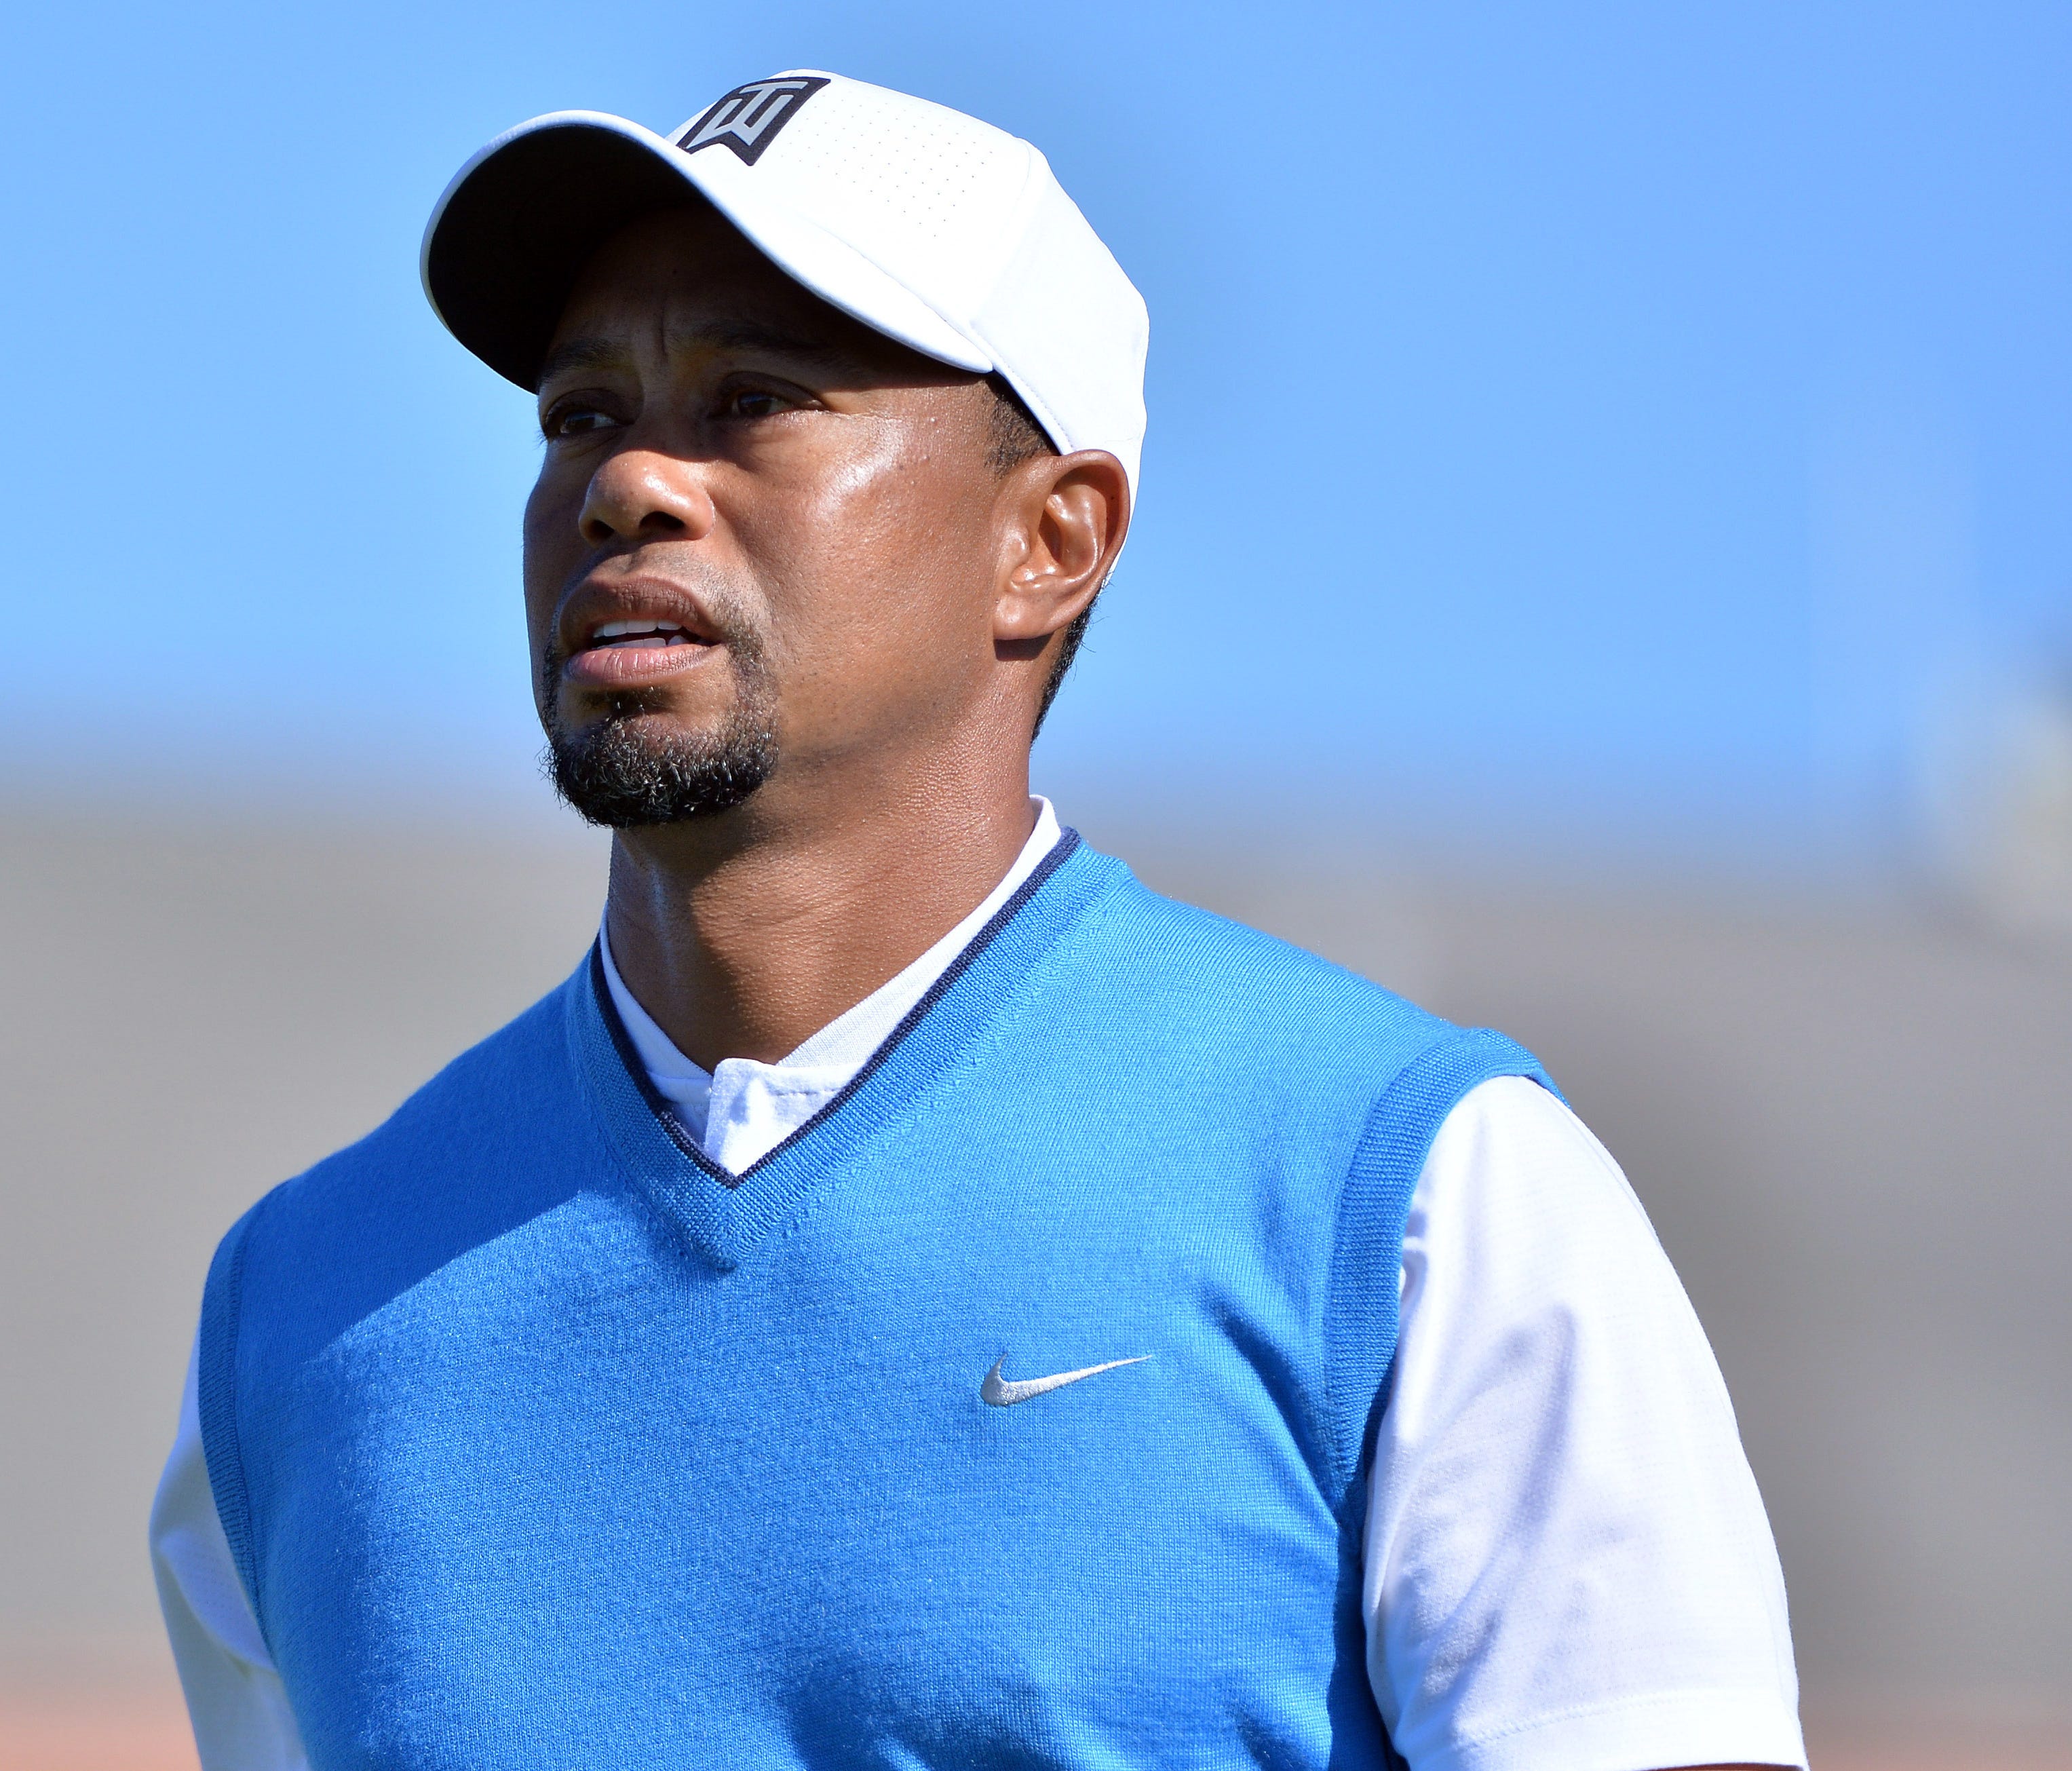 Tiger Woods looks on after teeing off on the 1st hole during the first round of the Farmers Insurance Open golf tournament at Torrey Pines Municipal Golf Course.